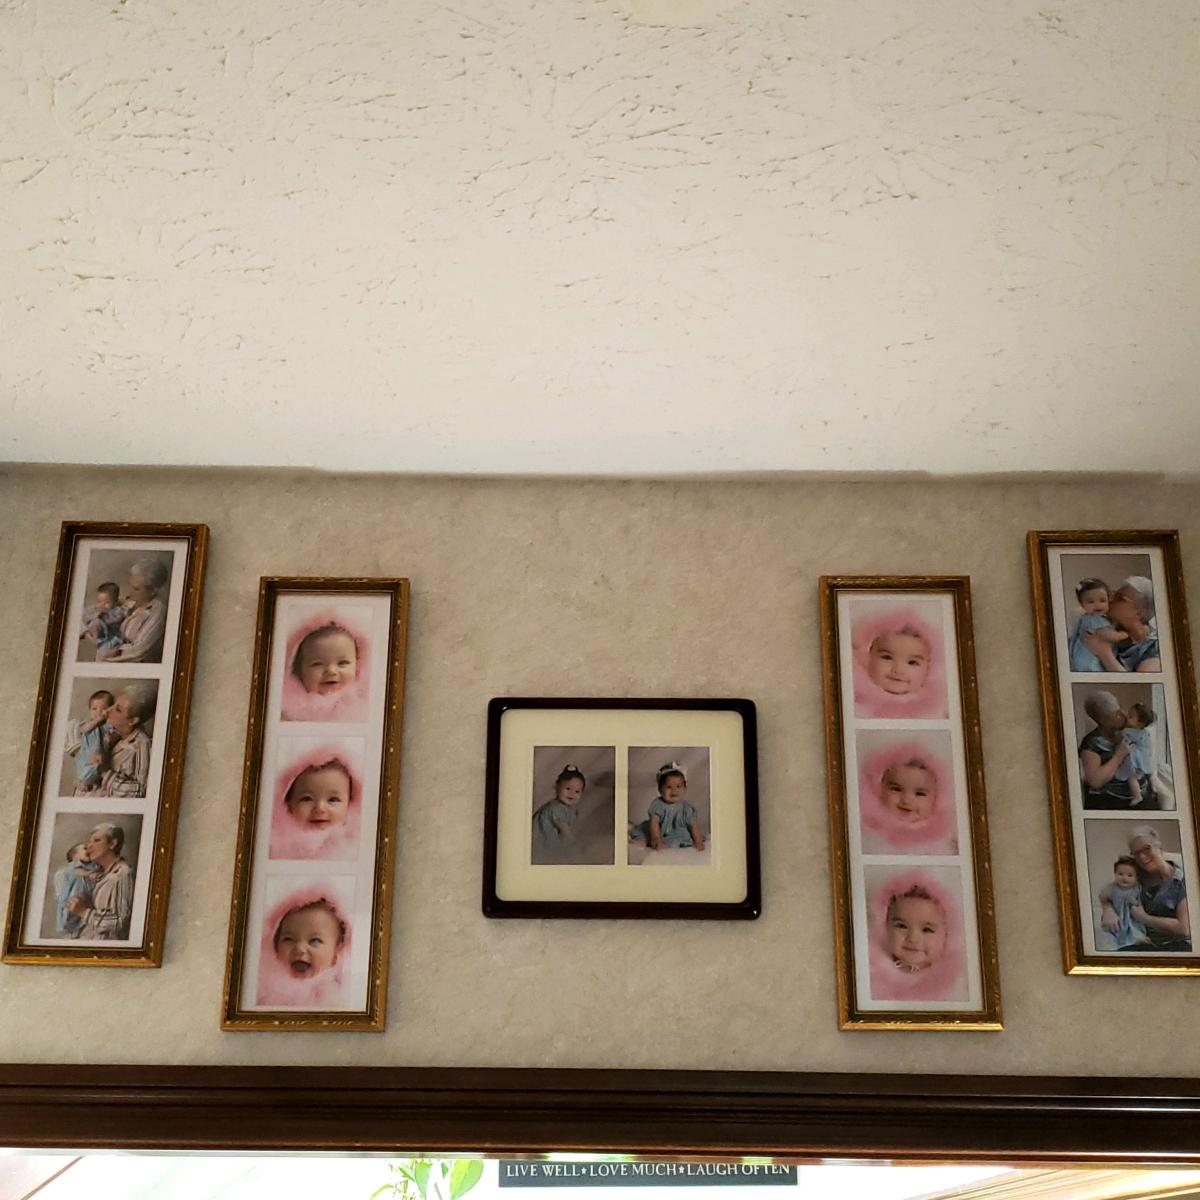 Love this display of Kathy's grands